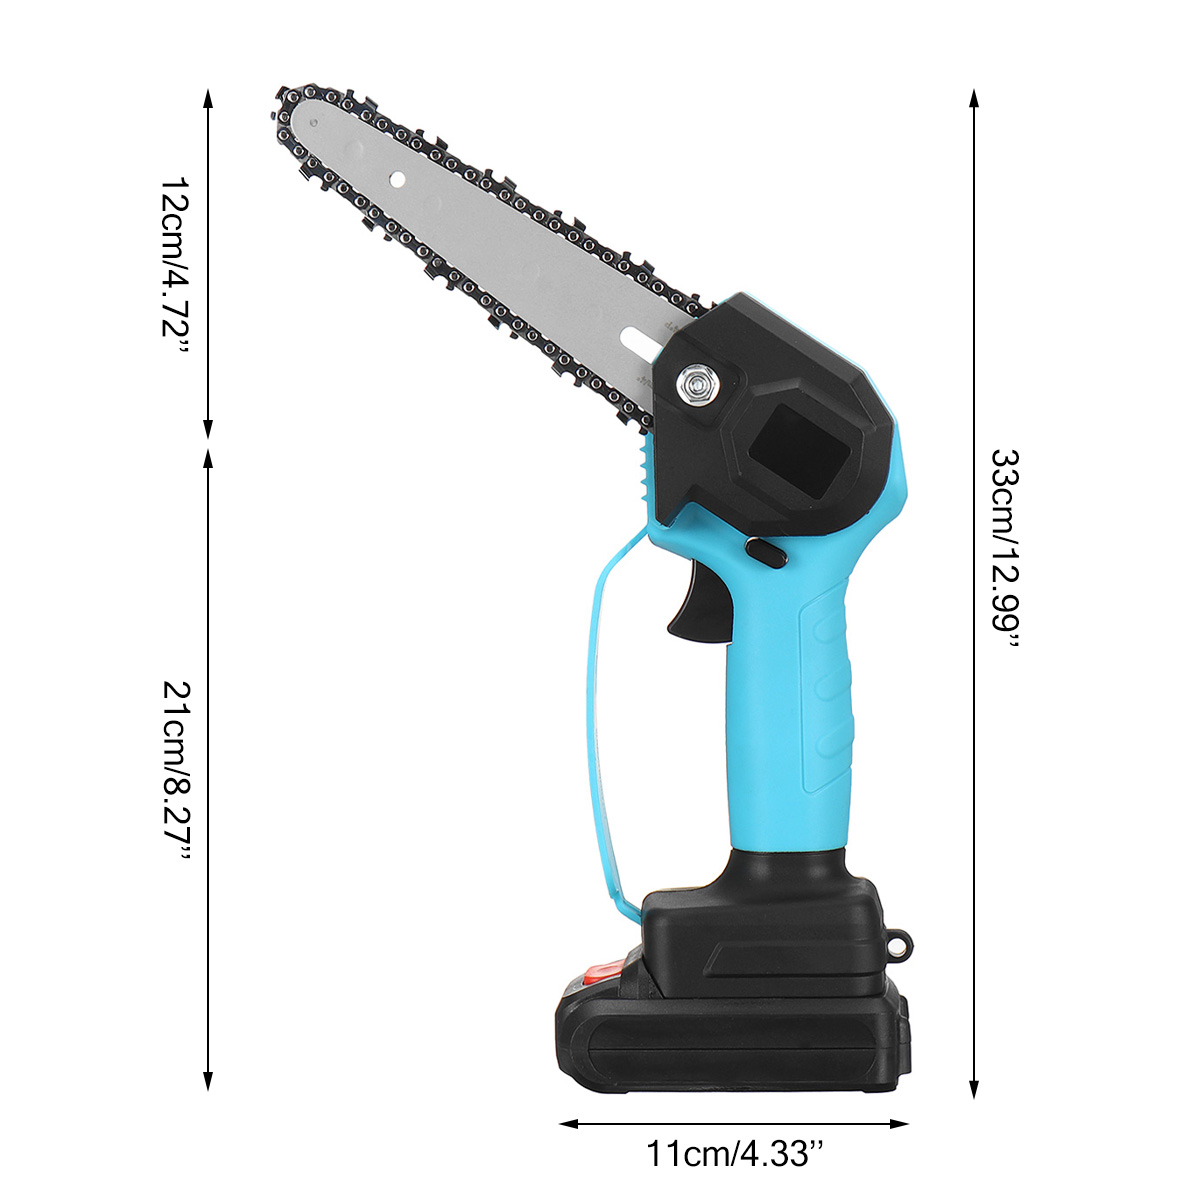 1600W-6Inch-24V-Rechargeable-Electric-Chain-Saw-Handheld-Mini-Chainsaw-Woodworking-Cutter-Tool-W-12p-1833049-9